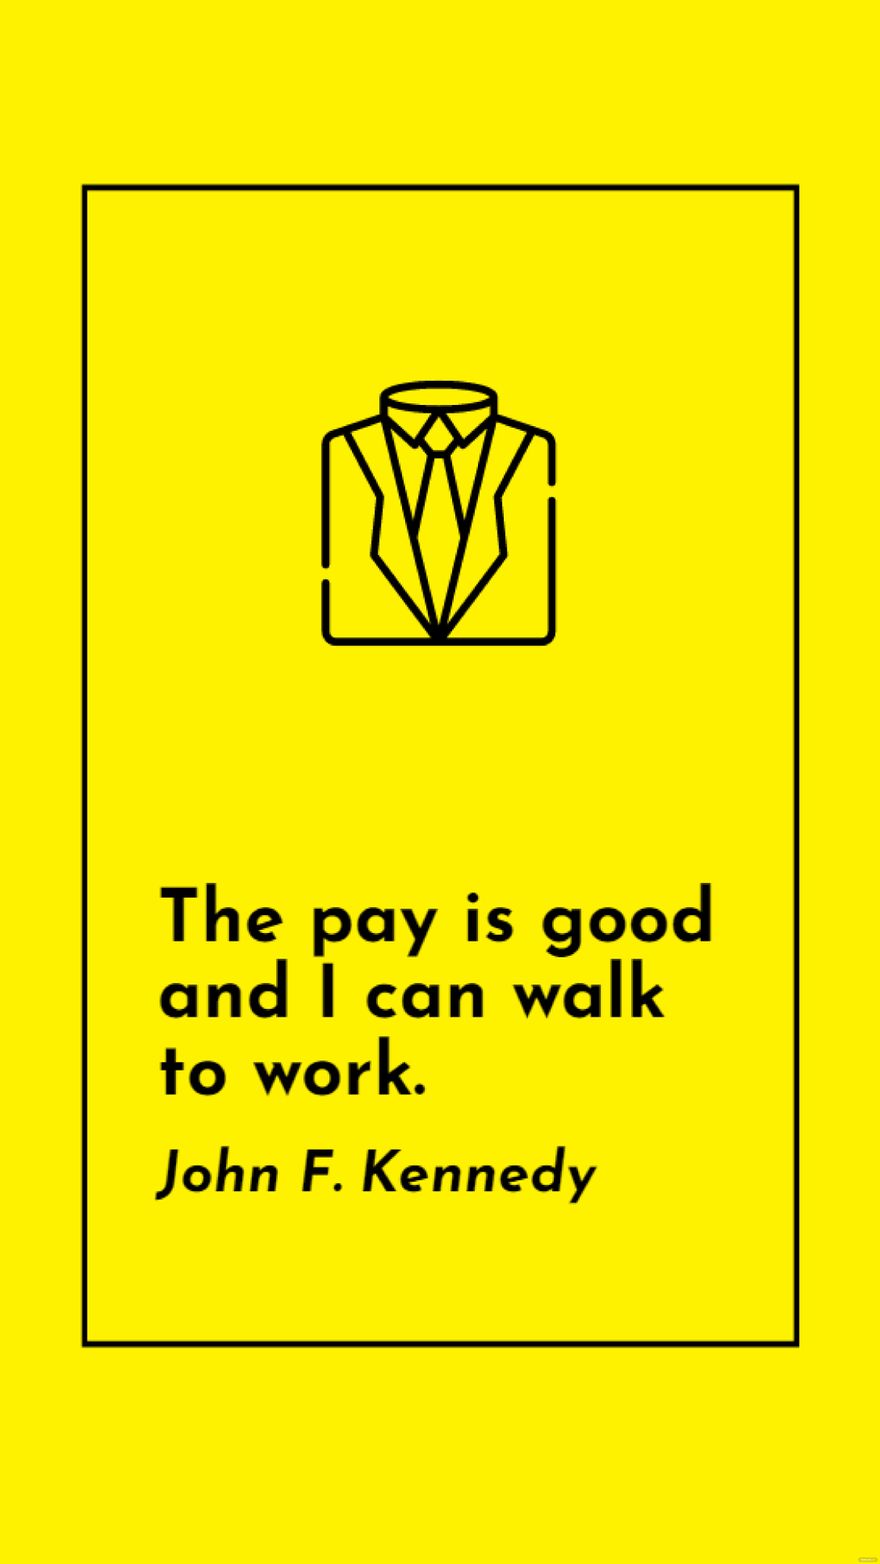 John F. Kennedy - The pay is good and I can walk to work.